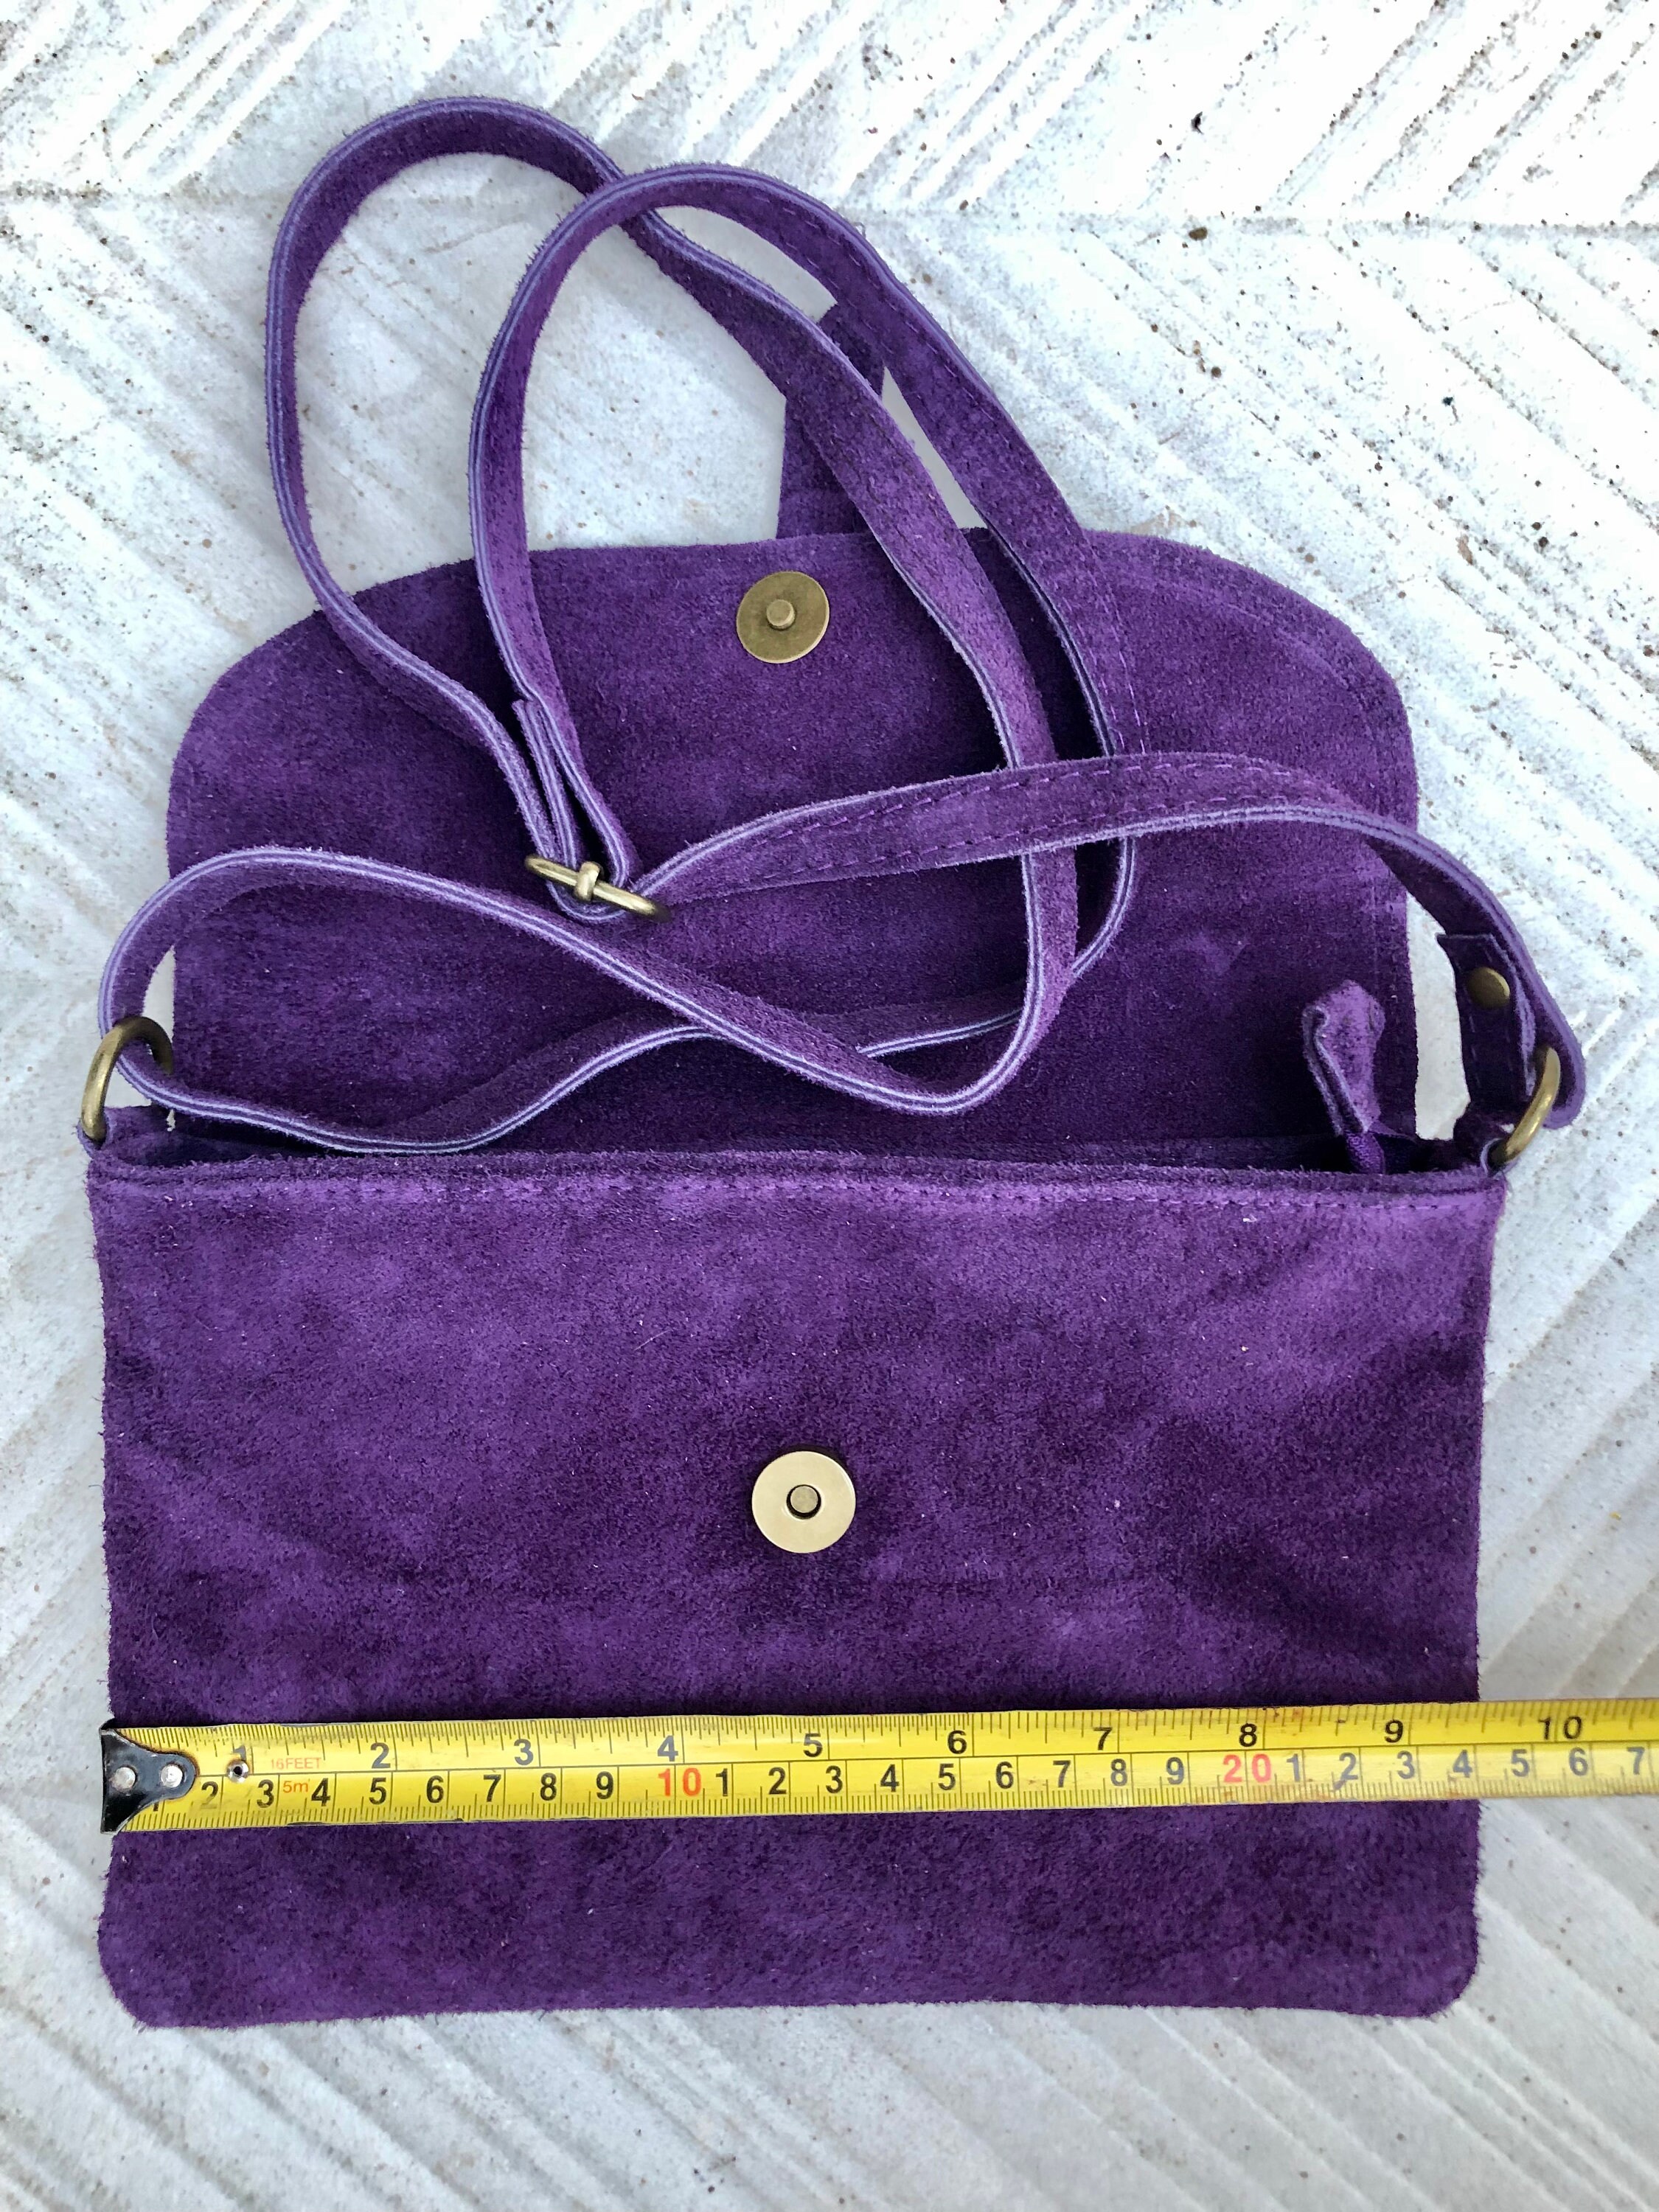 Suede Leather Bag in PURPLE. GENUINE Leather Crossbody Bag. 